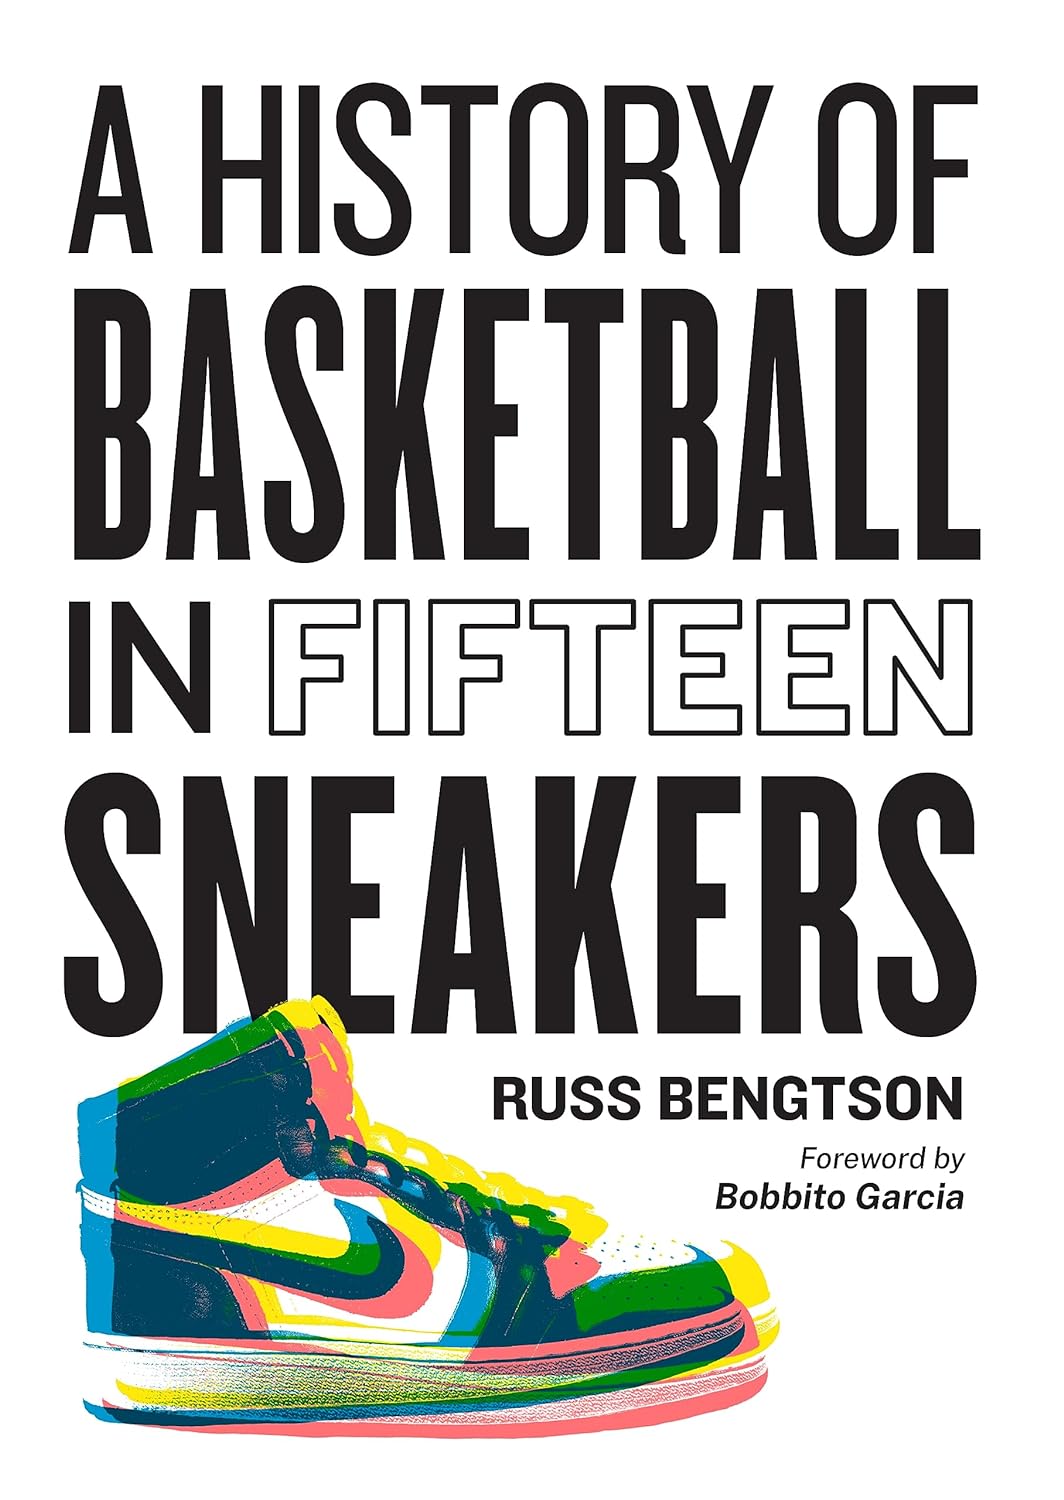 HISTORY OF BASKETBALL SNEAKERS